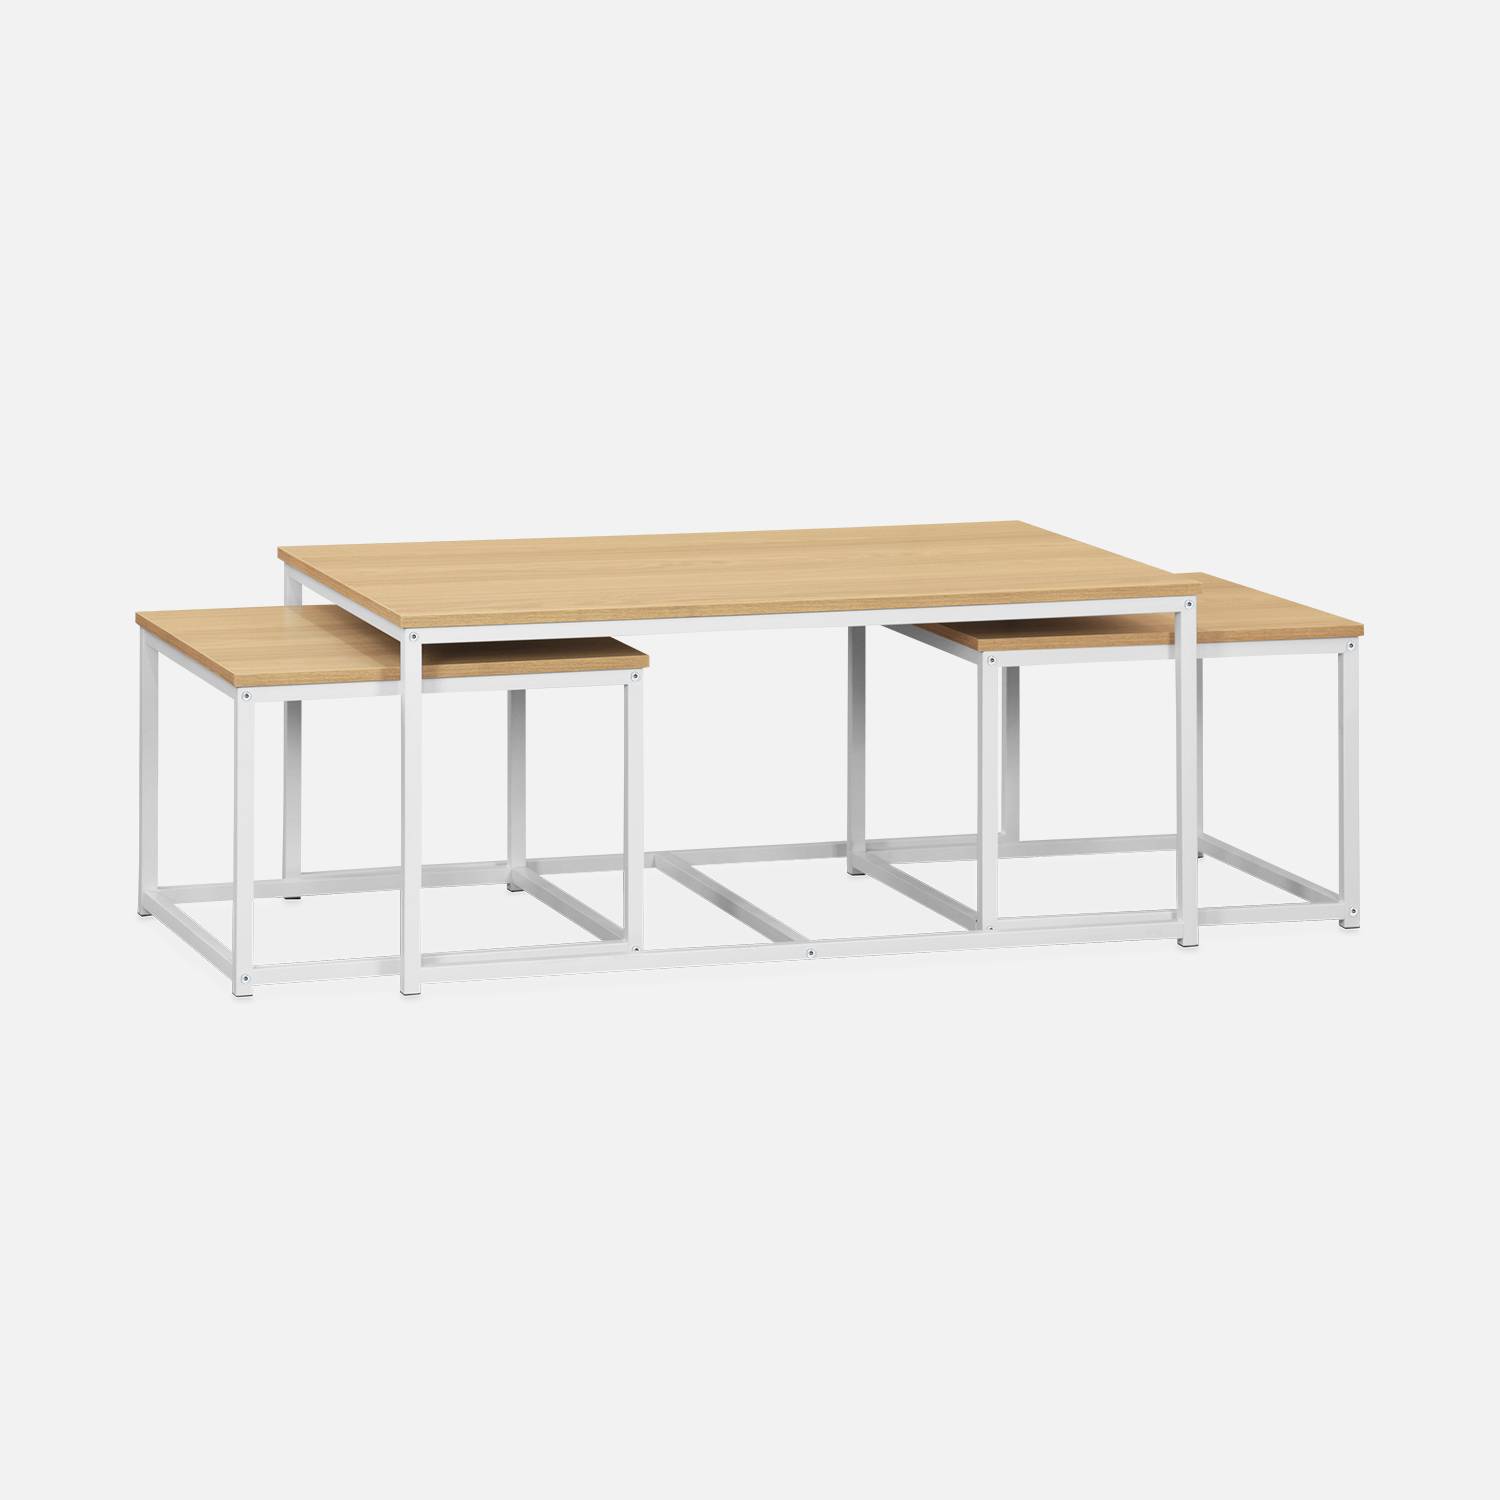 Set of 3 metal and wood-effect nesting tables, large table:100x60x45cm, 2 x small tables:50x50x38cm - Loft - White Photo2